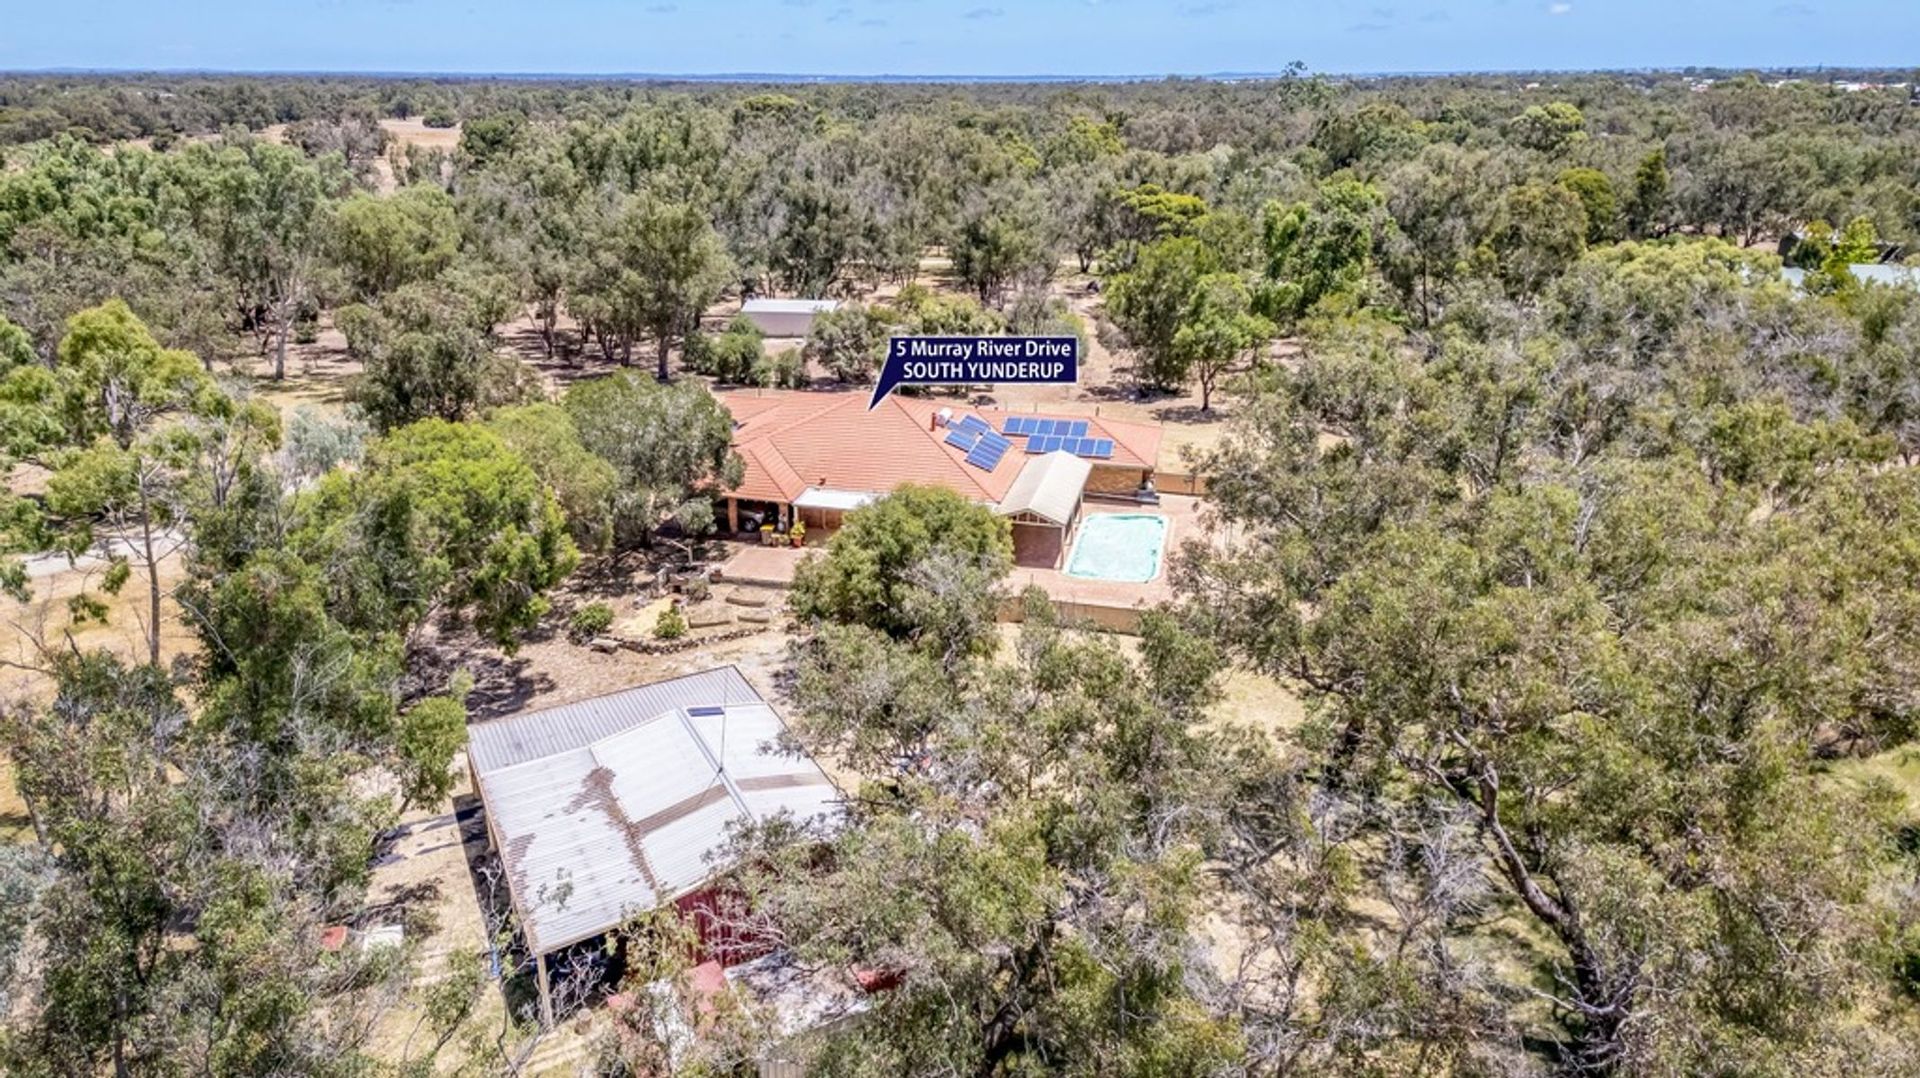 5 Murray River Dr, South Yunderup WA 6208, Image 2